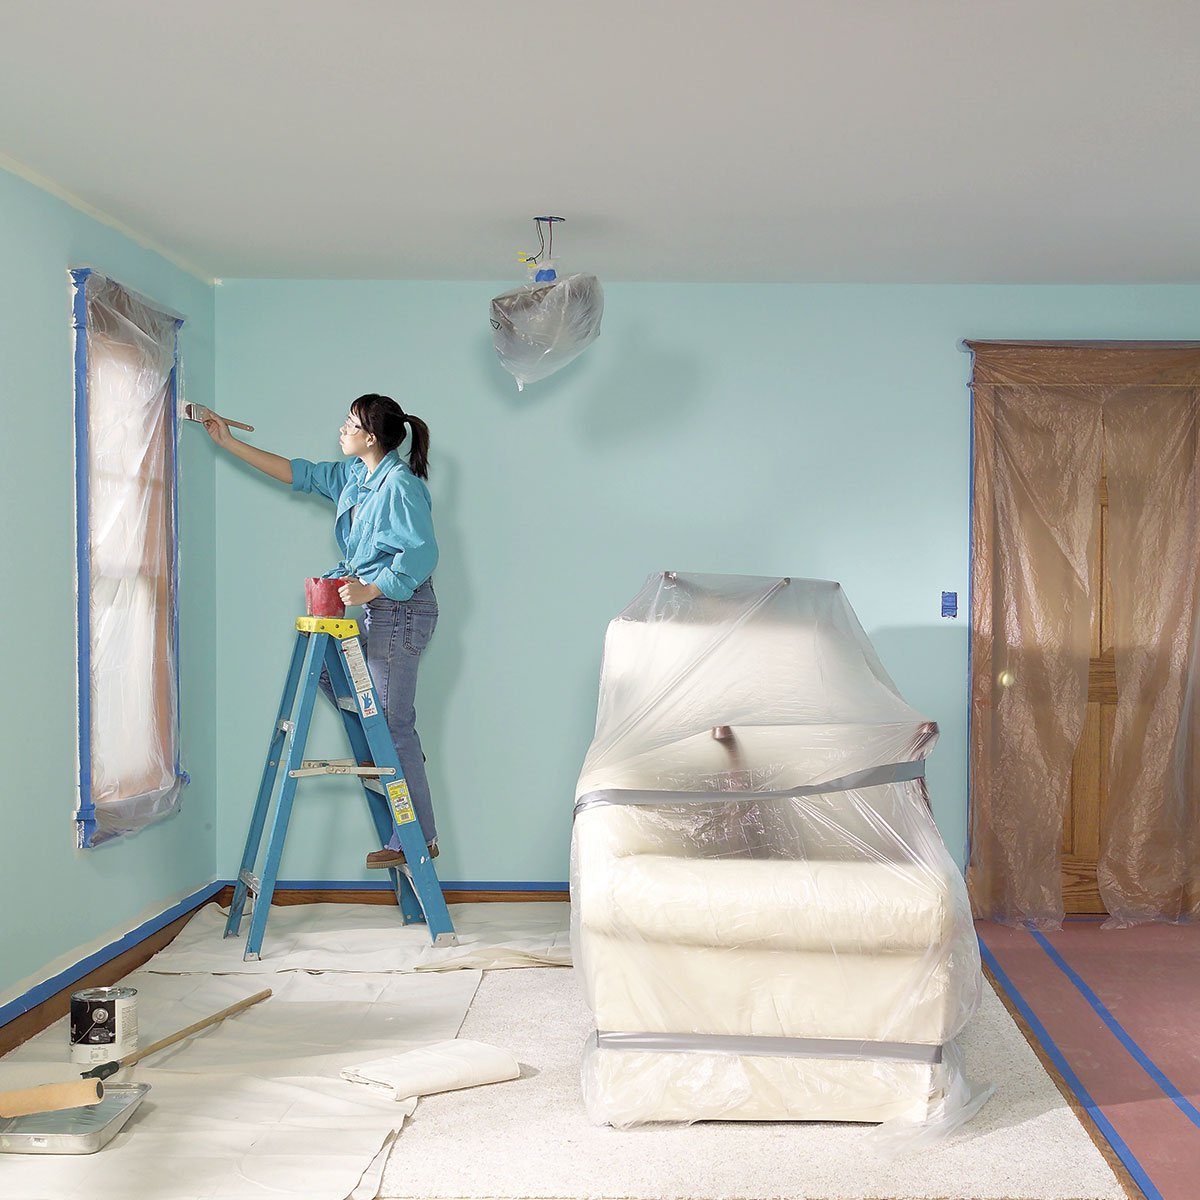 Clear the Entire Room Before Painting